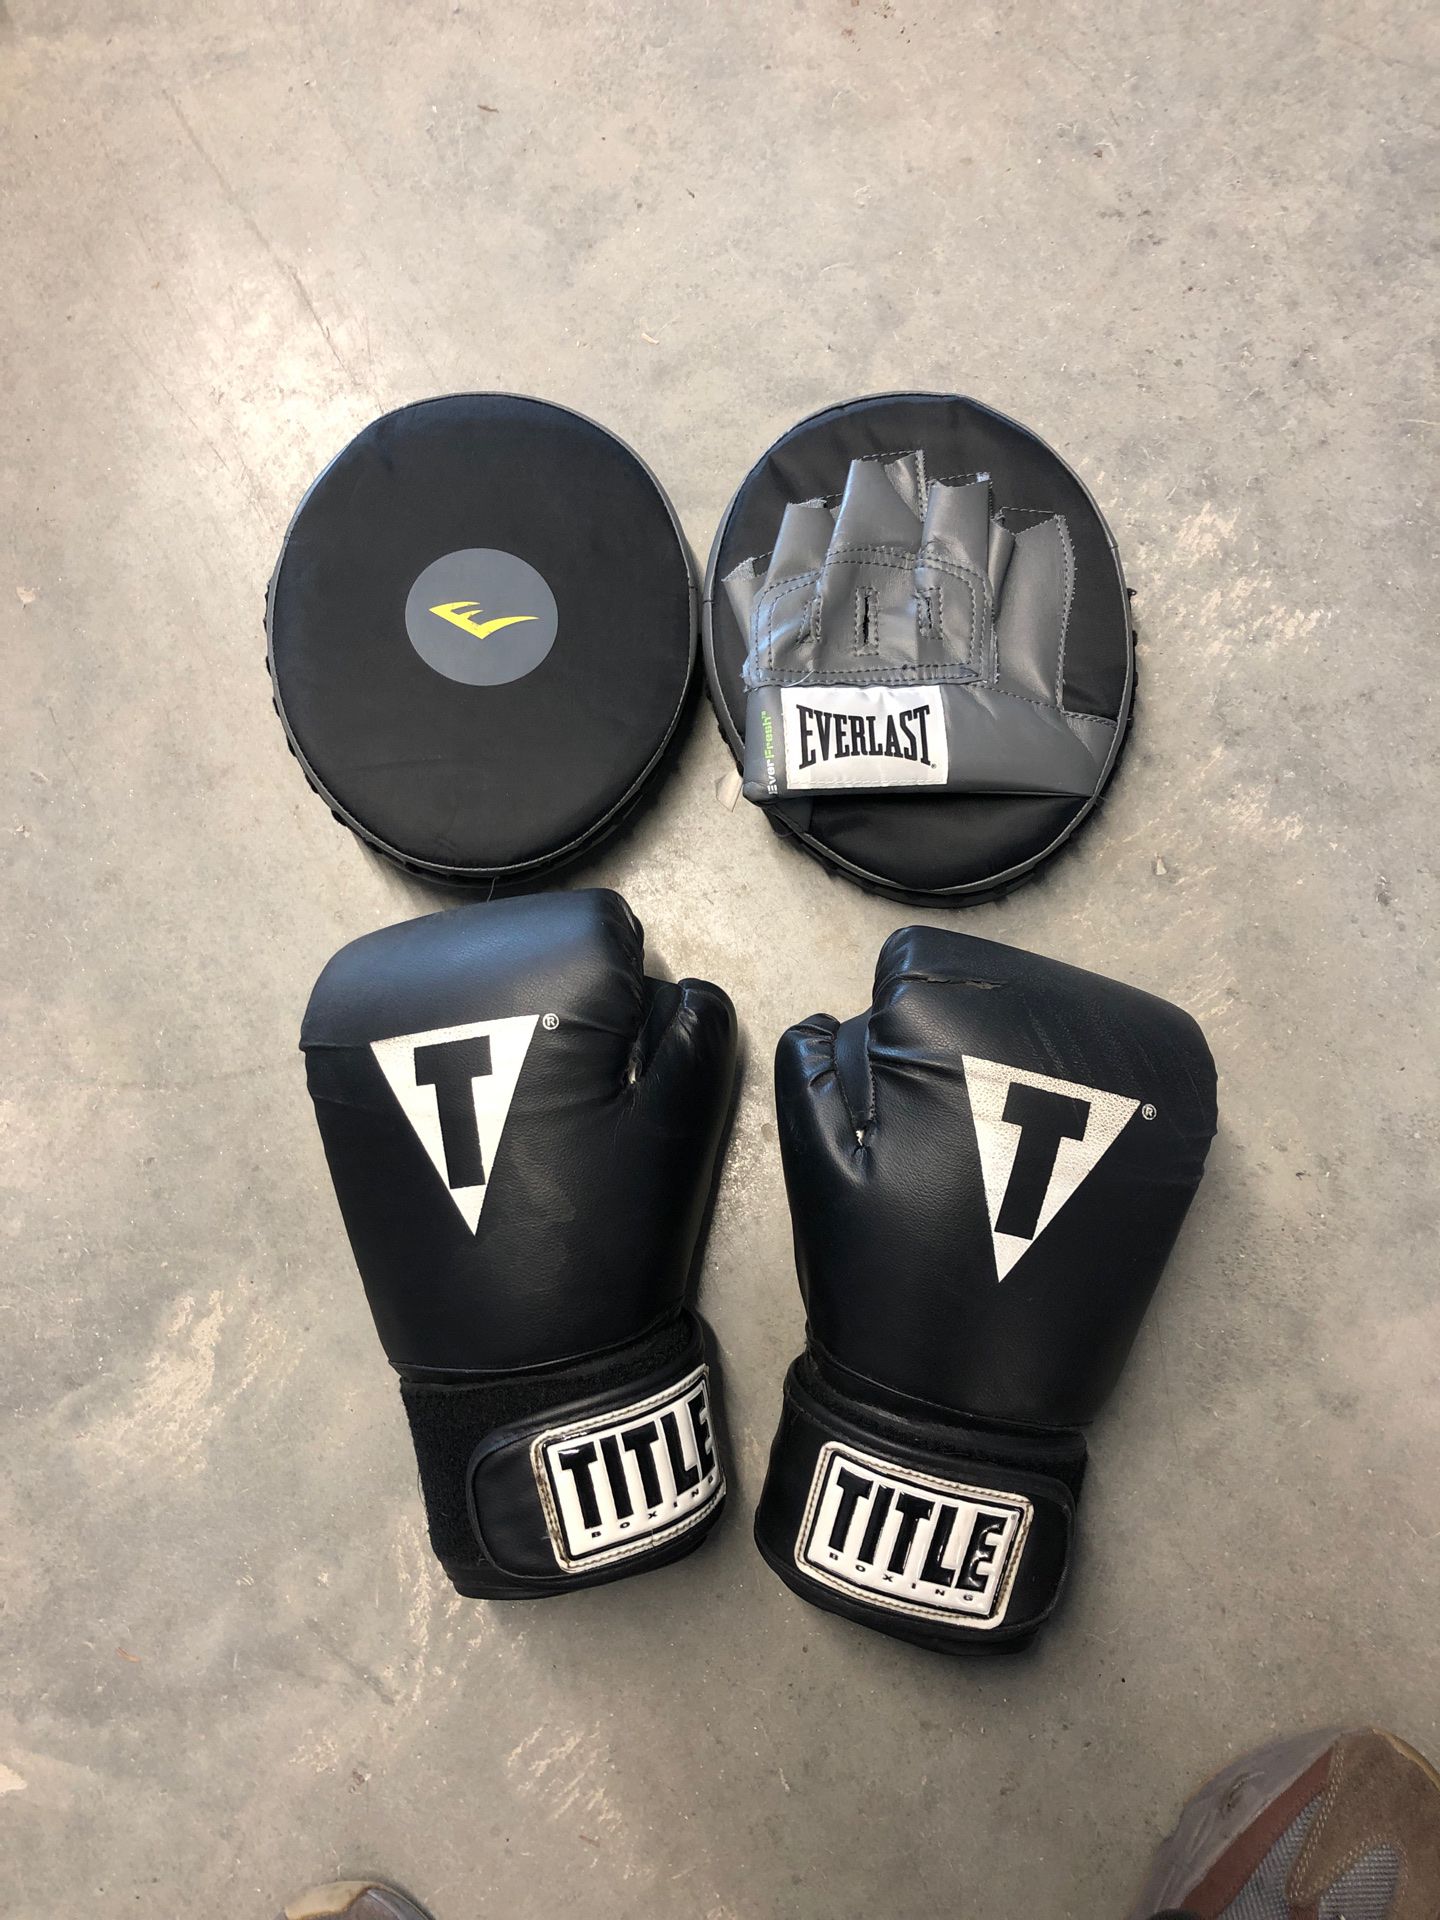 Title boxing gloves and everlast mits